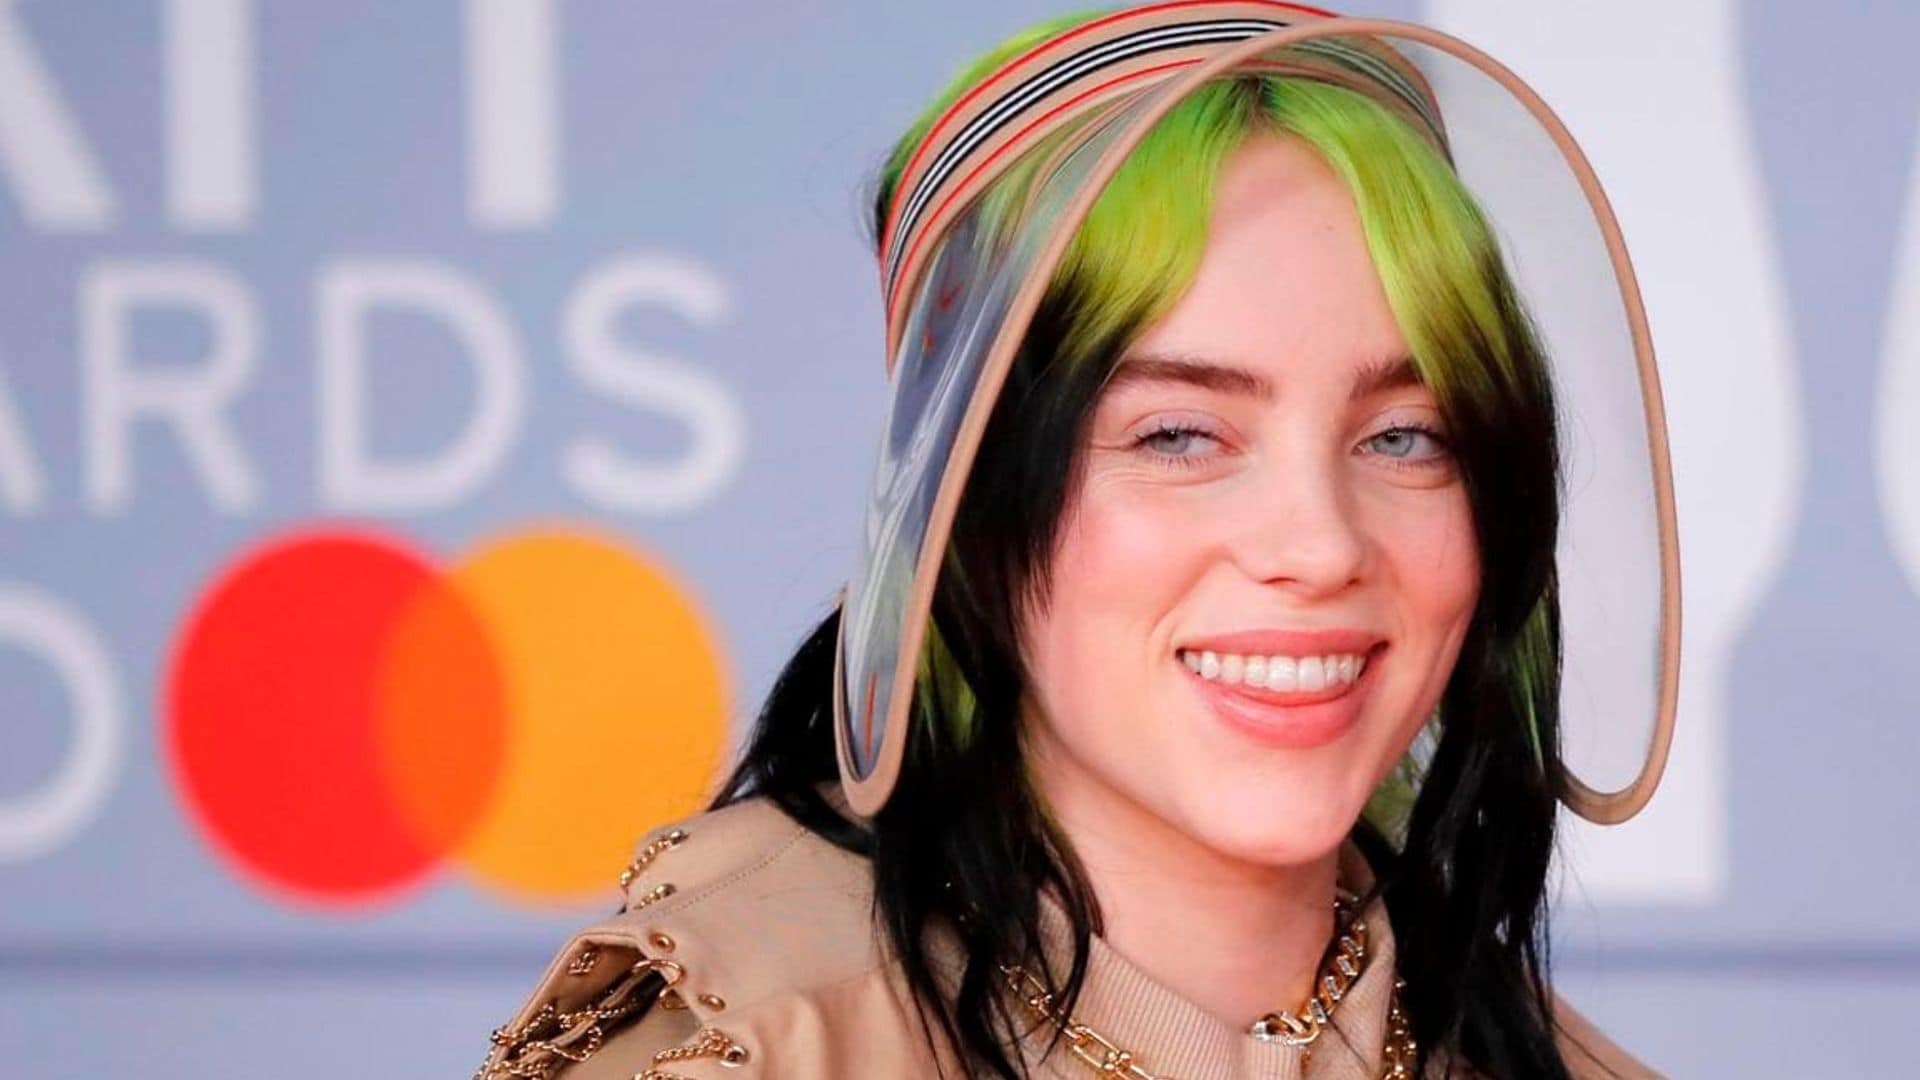 Billie Eilish reveals why she keeps her love life private